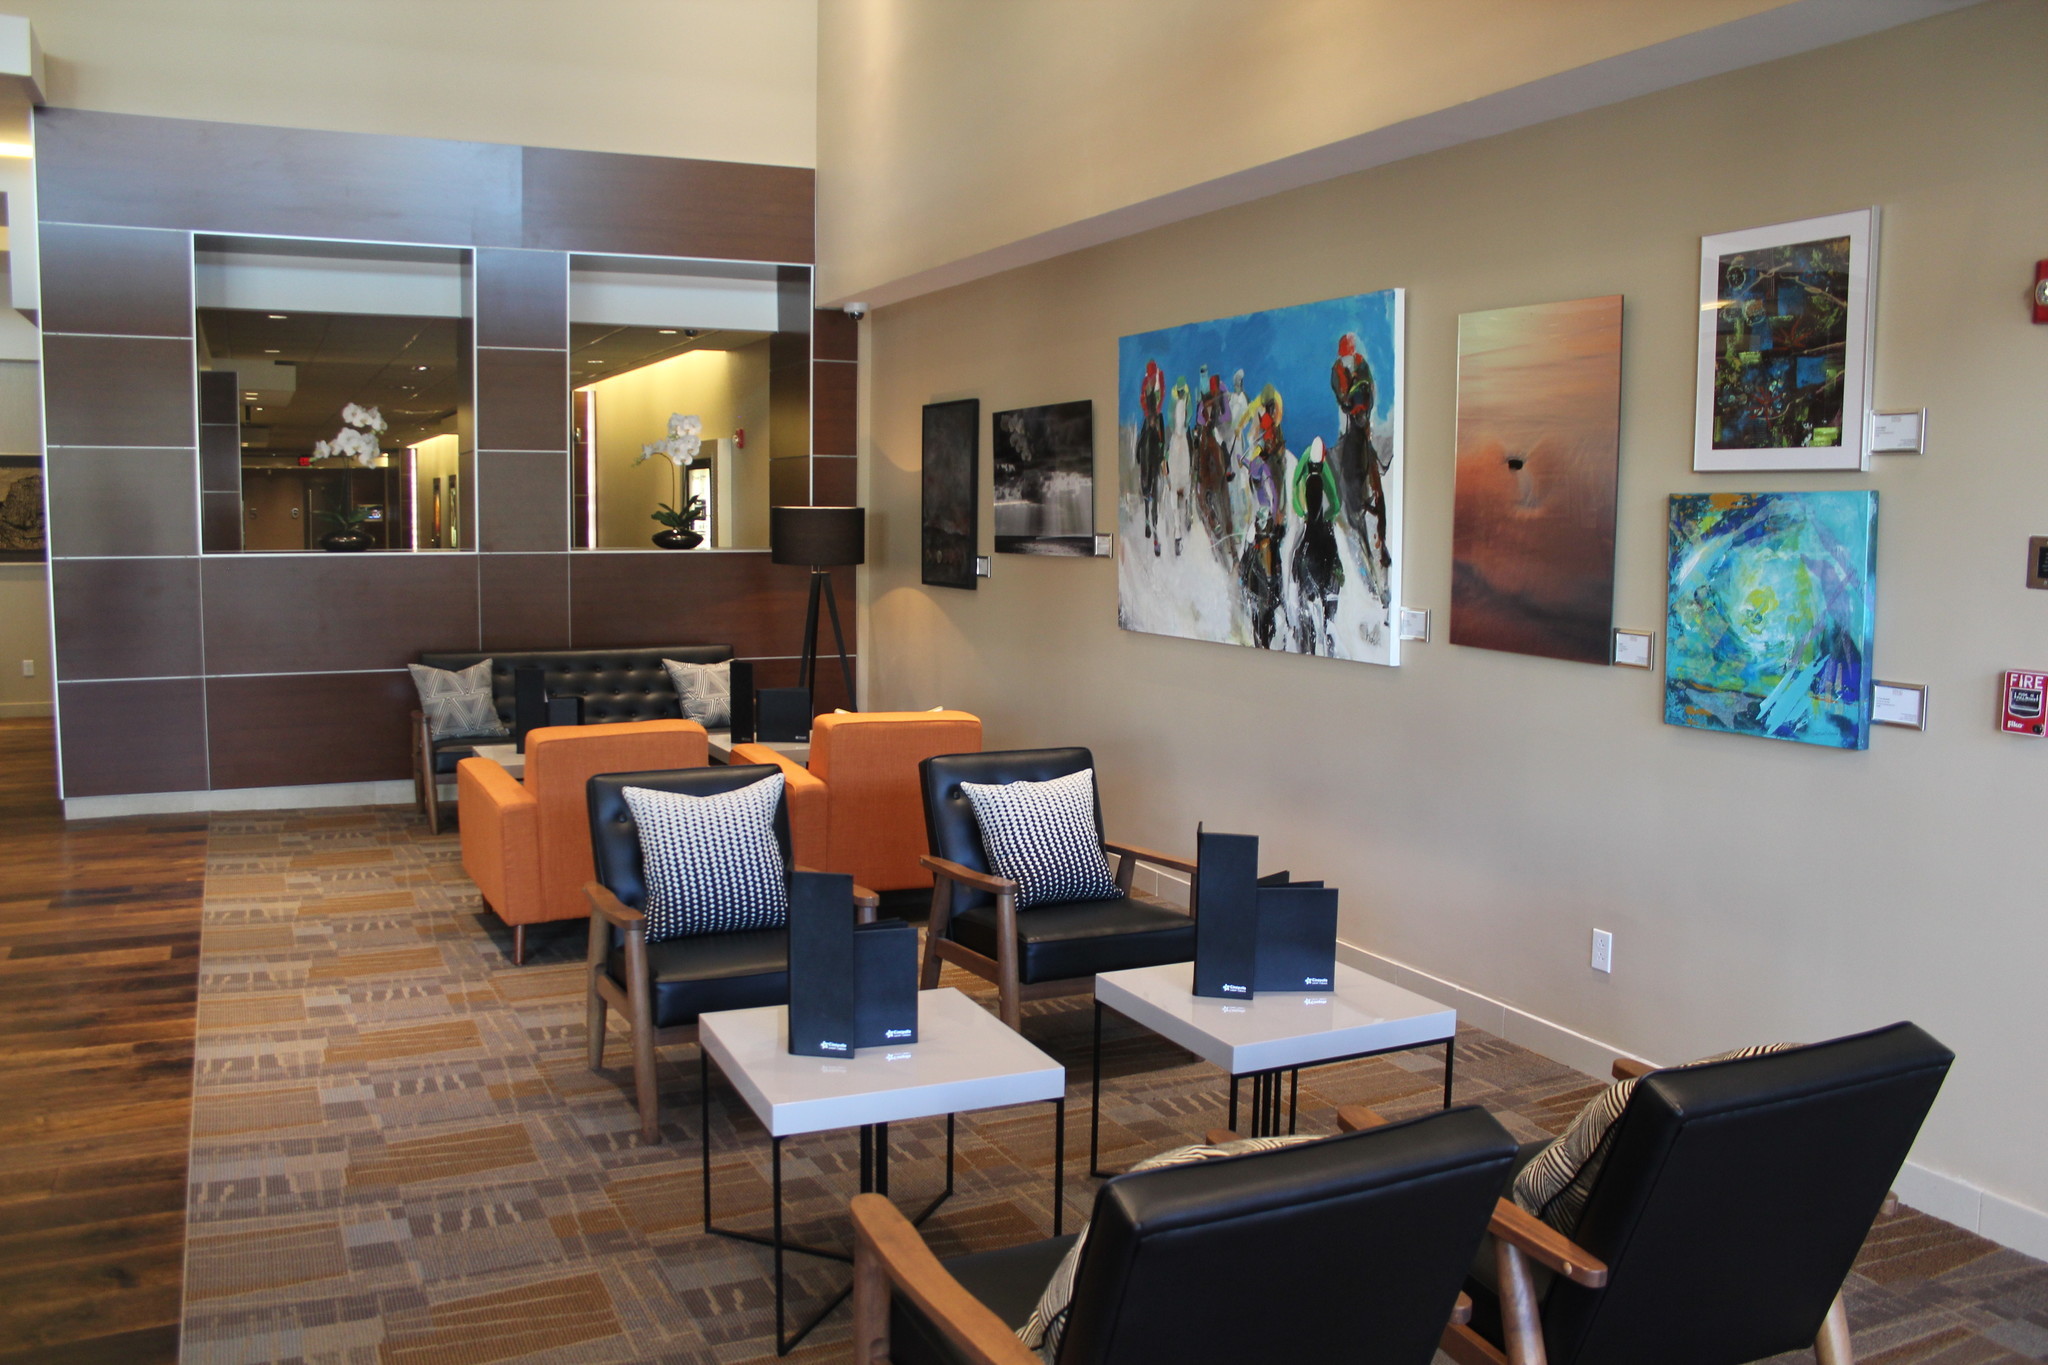 The expanded lobby in Cinepolis features artwork from Del Mar Art Center.